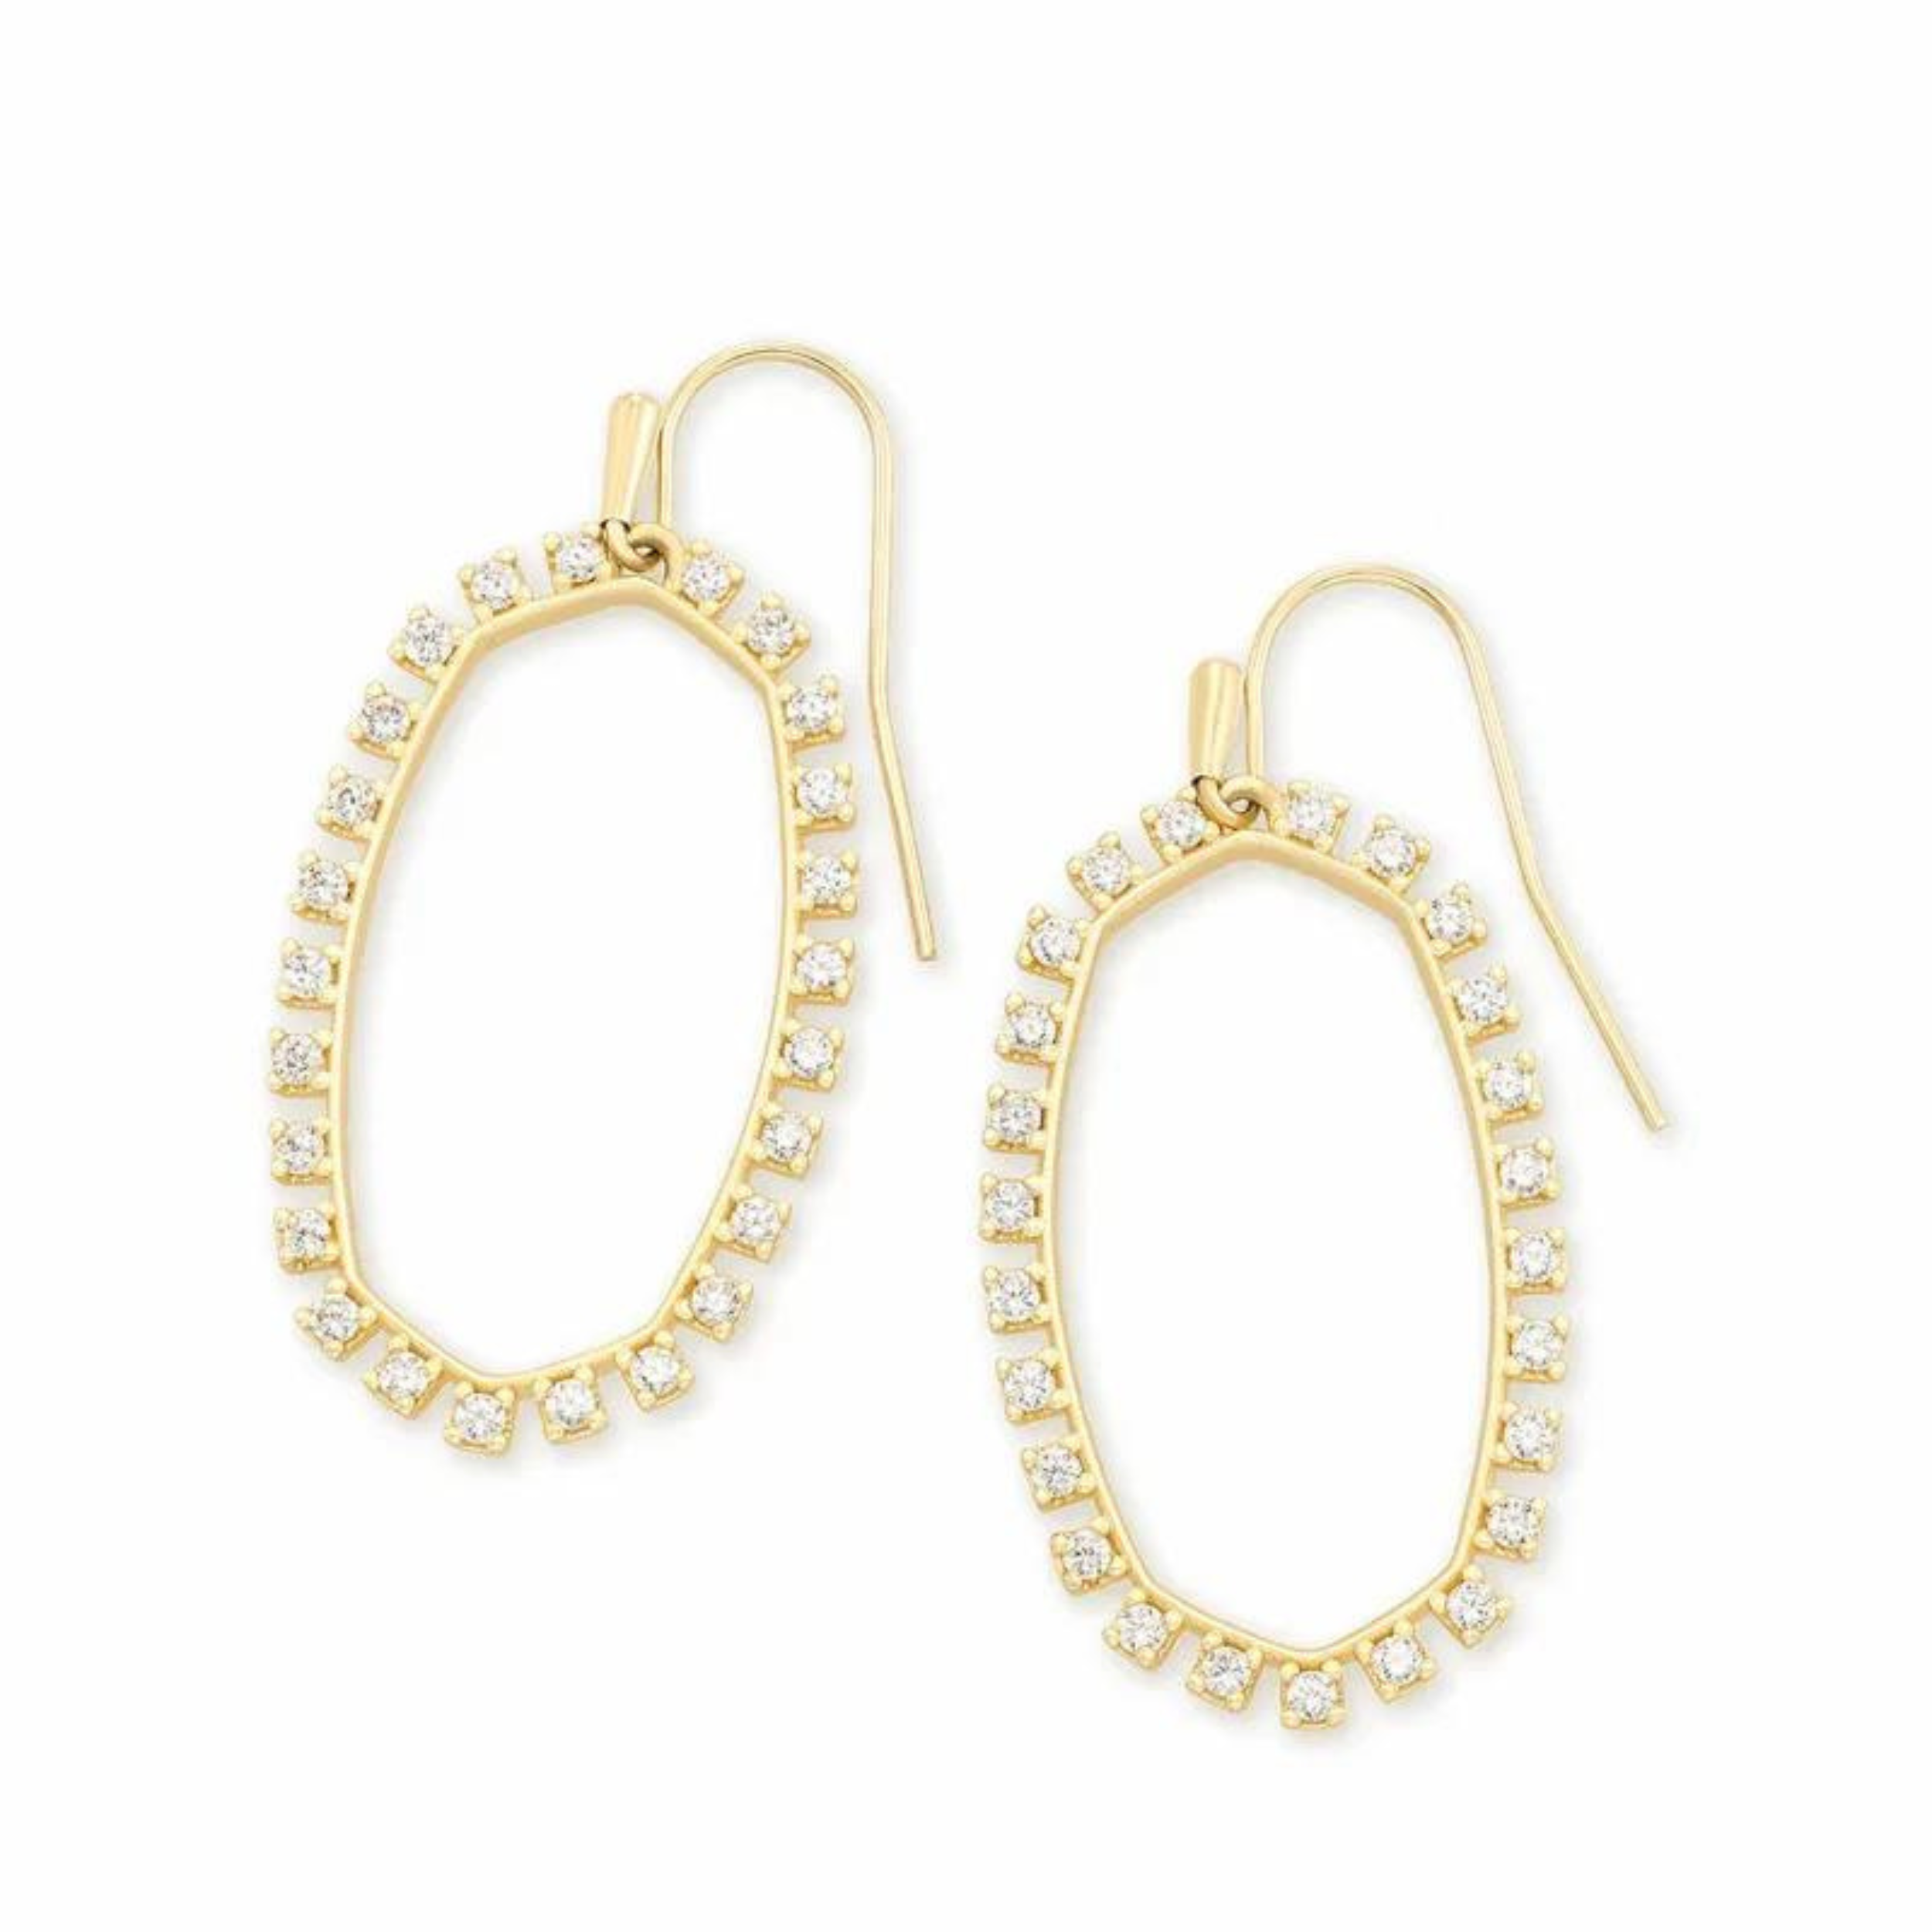 Gold dangle earrings with crystals pictured on a white background.